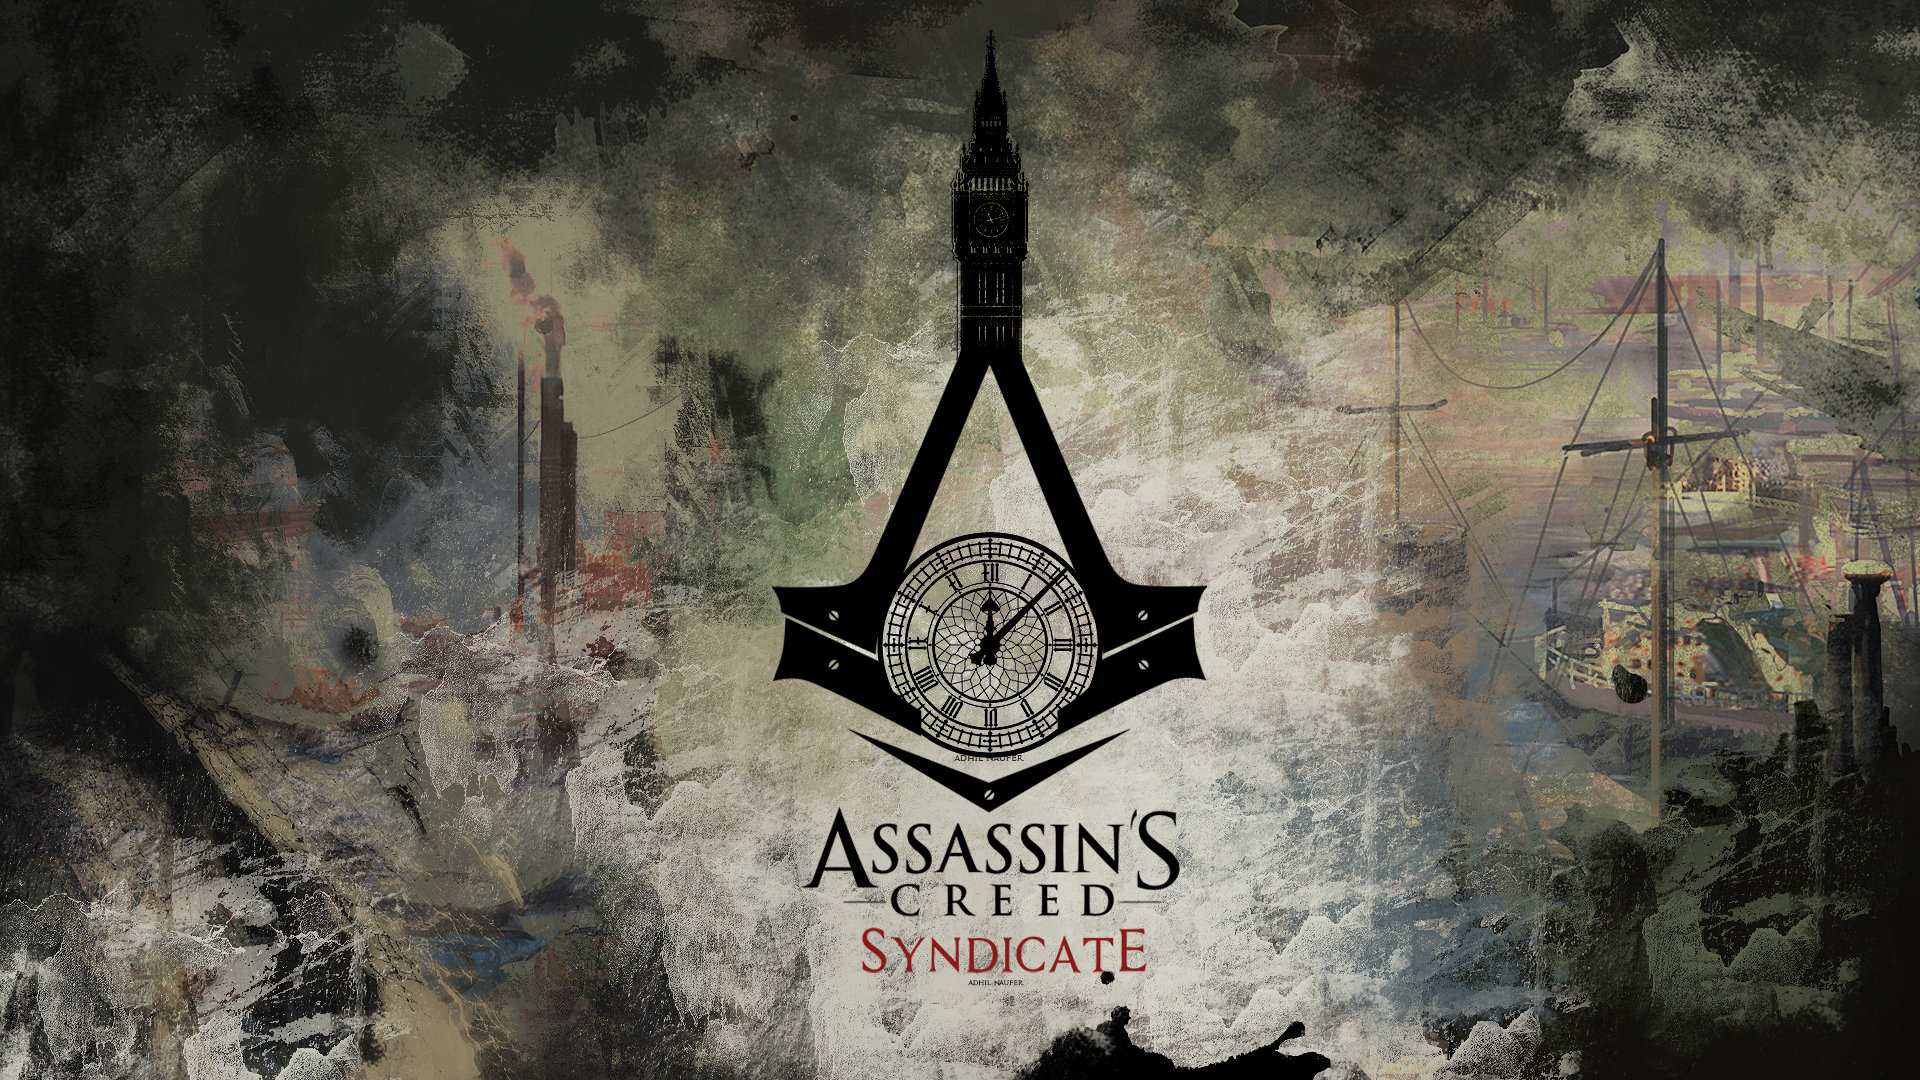 Download full hd 1920x1080 Assassin's Creed: Syndicate desktop background ID:260247 for free